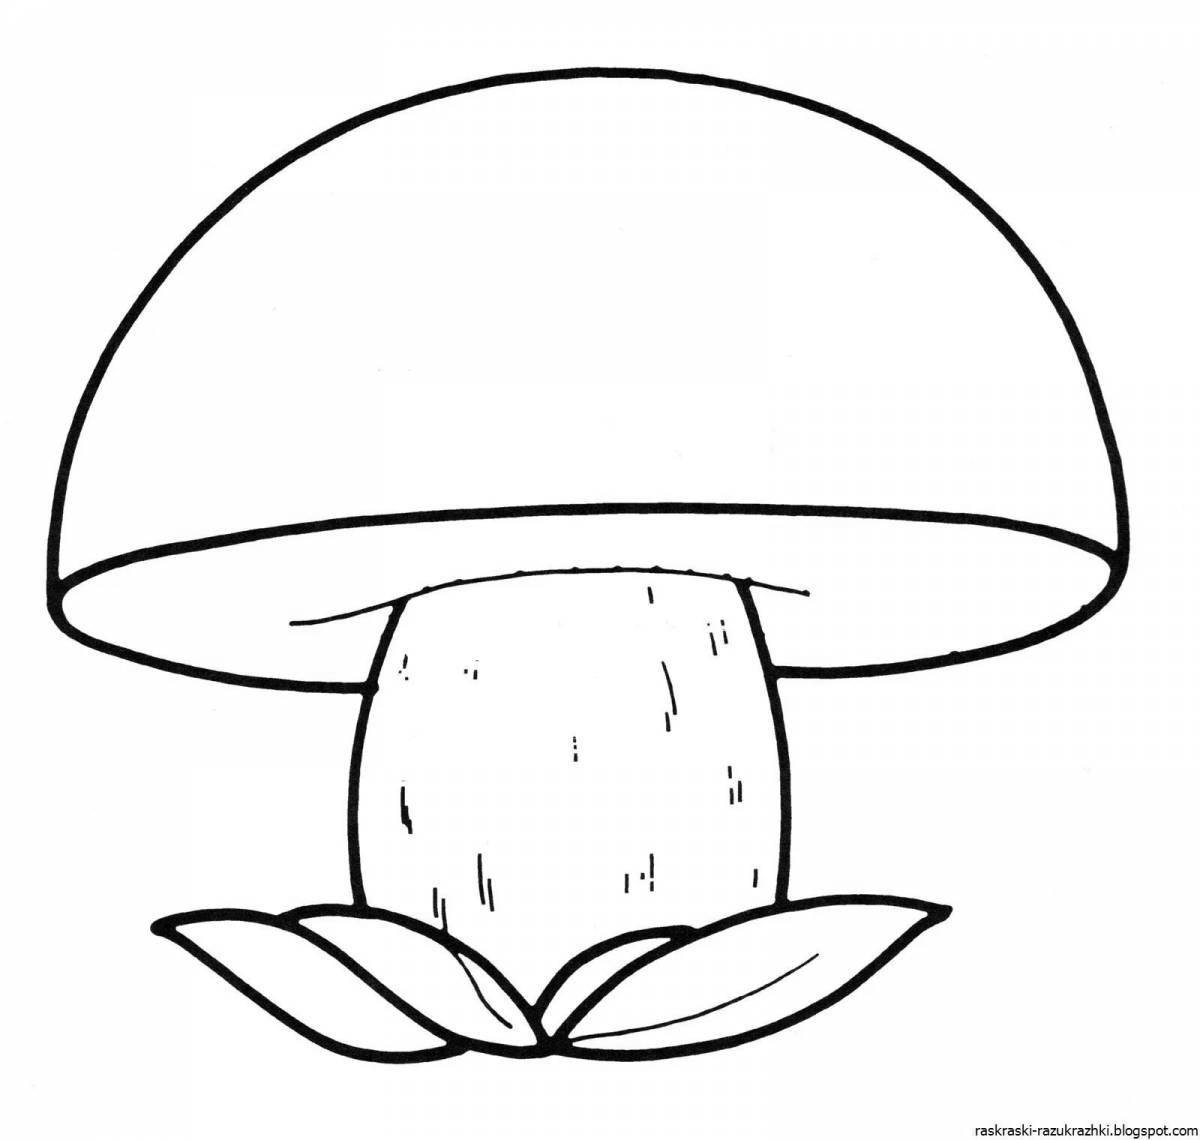 Colorful porcini mushrooms coloring pages for kids